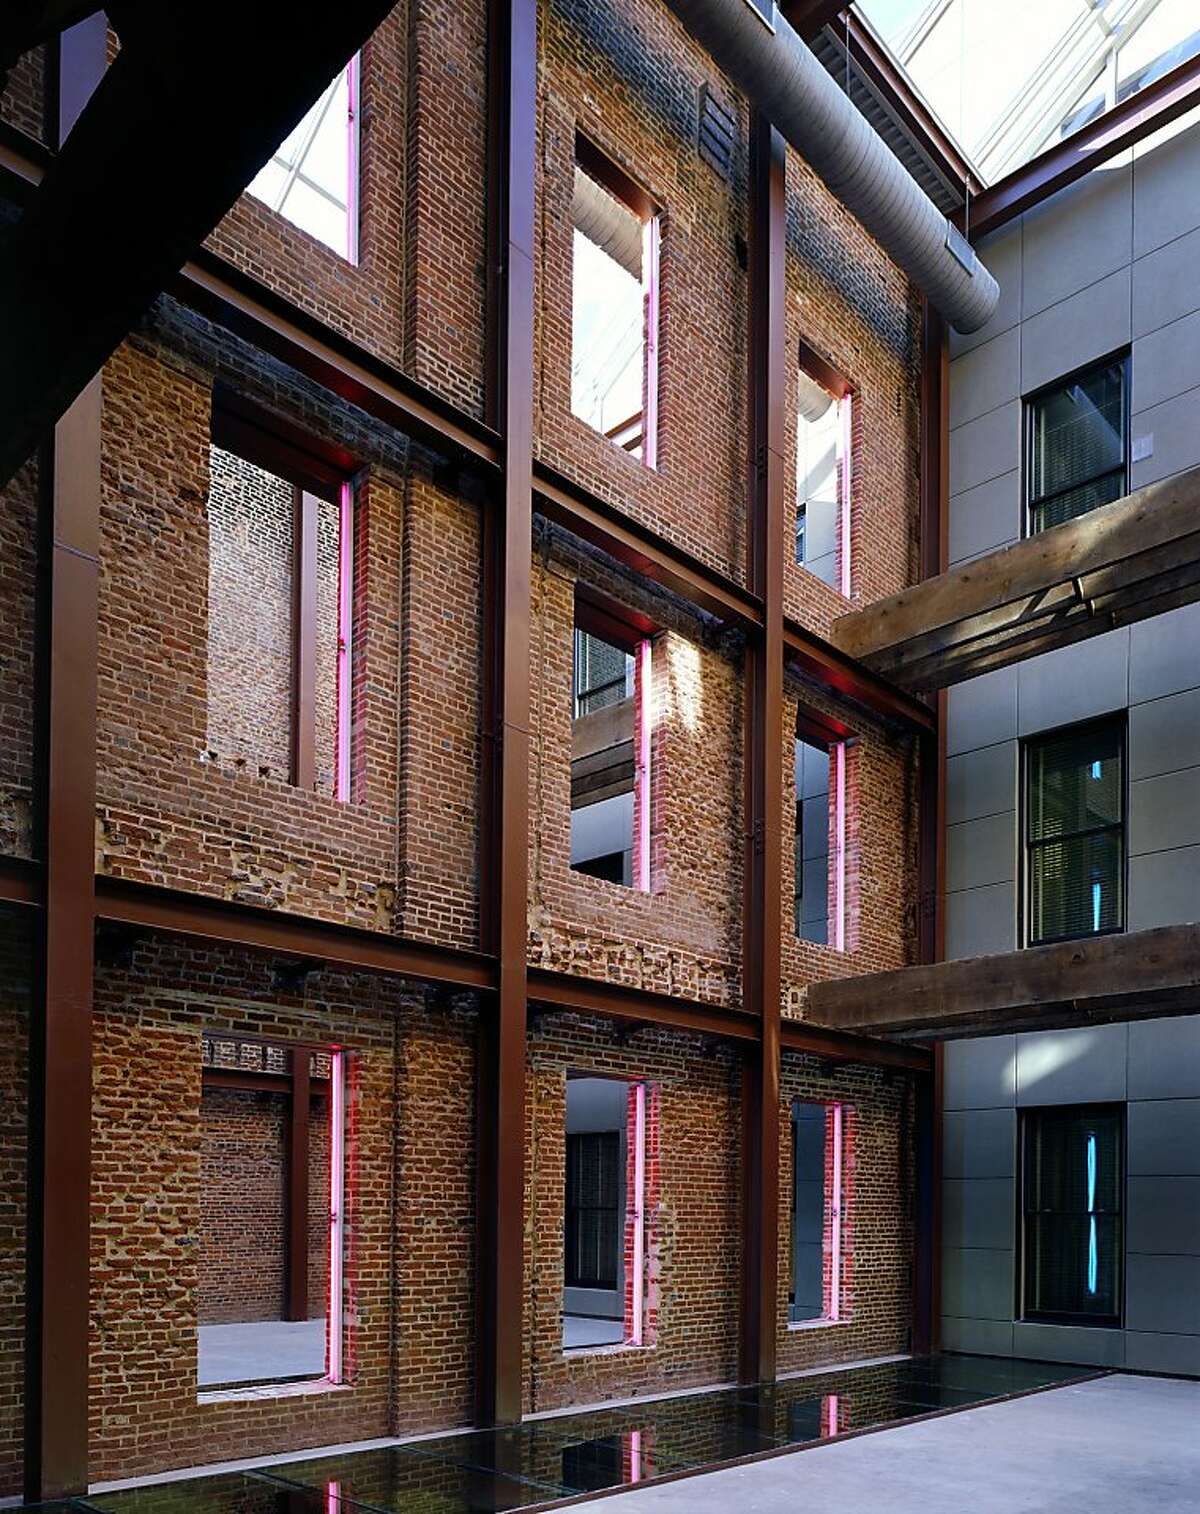 The 21C Museum Hotel in Louisville, designed by Deborah Berke Partners, converted four 19th Century warehouse buildings into a single compound, mixing contemporary details with such original elements as the brick structural walls.